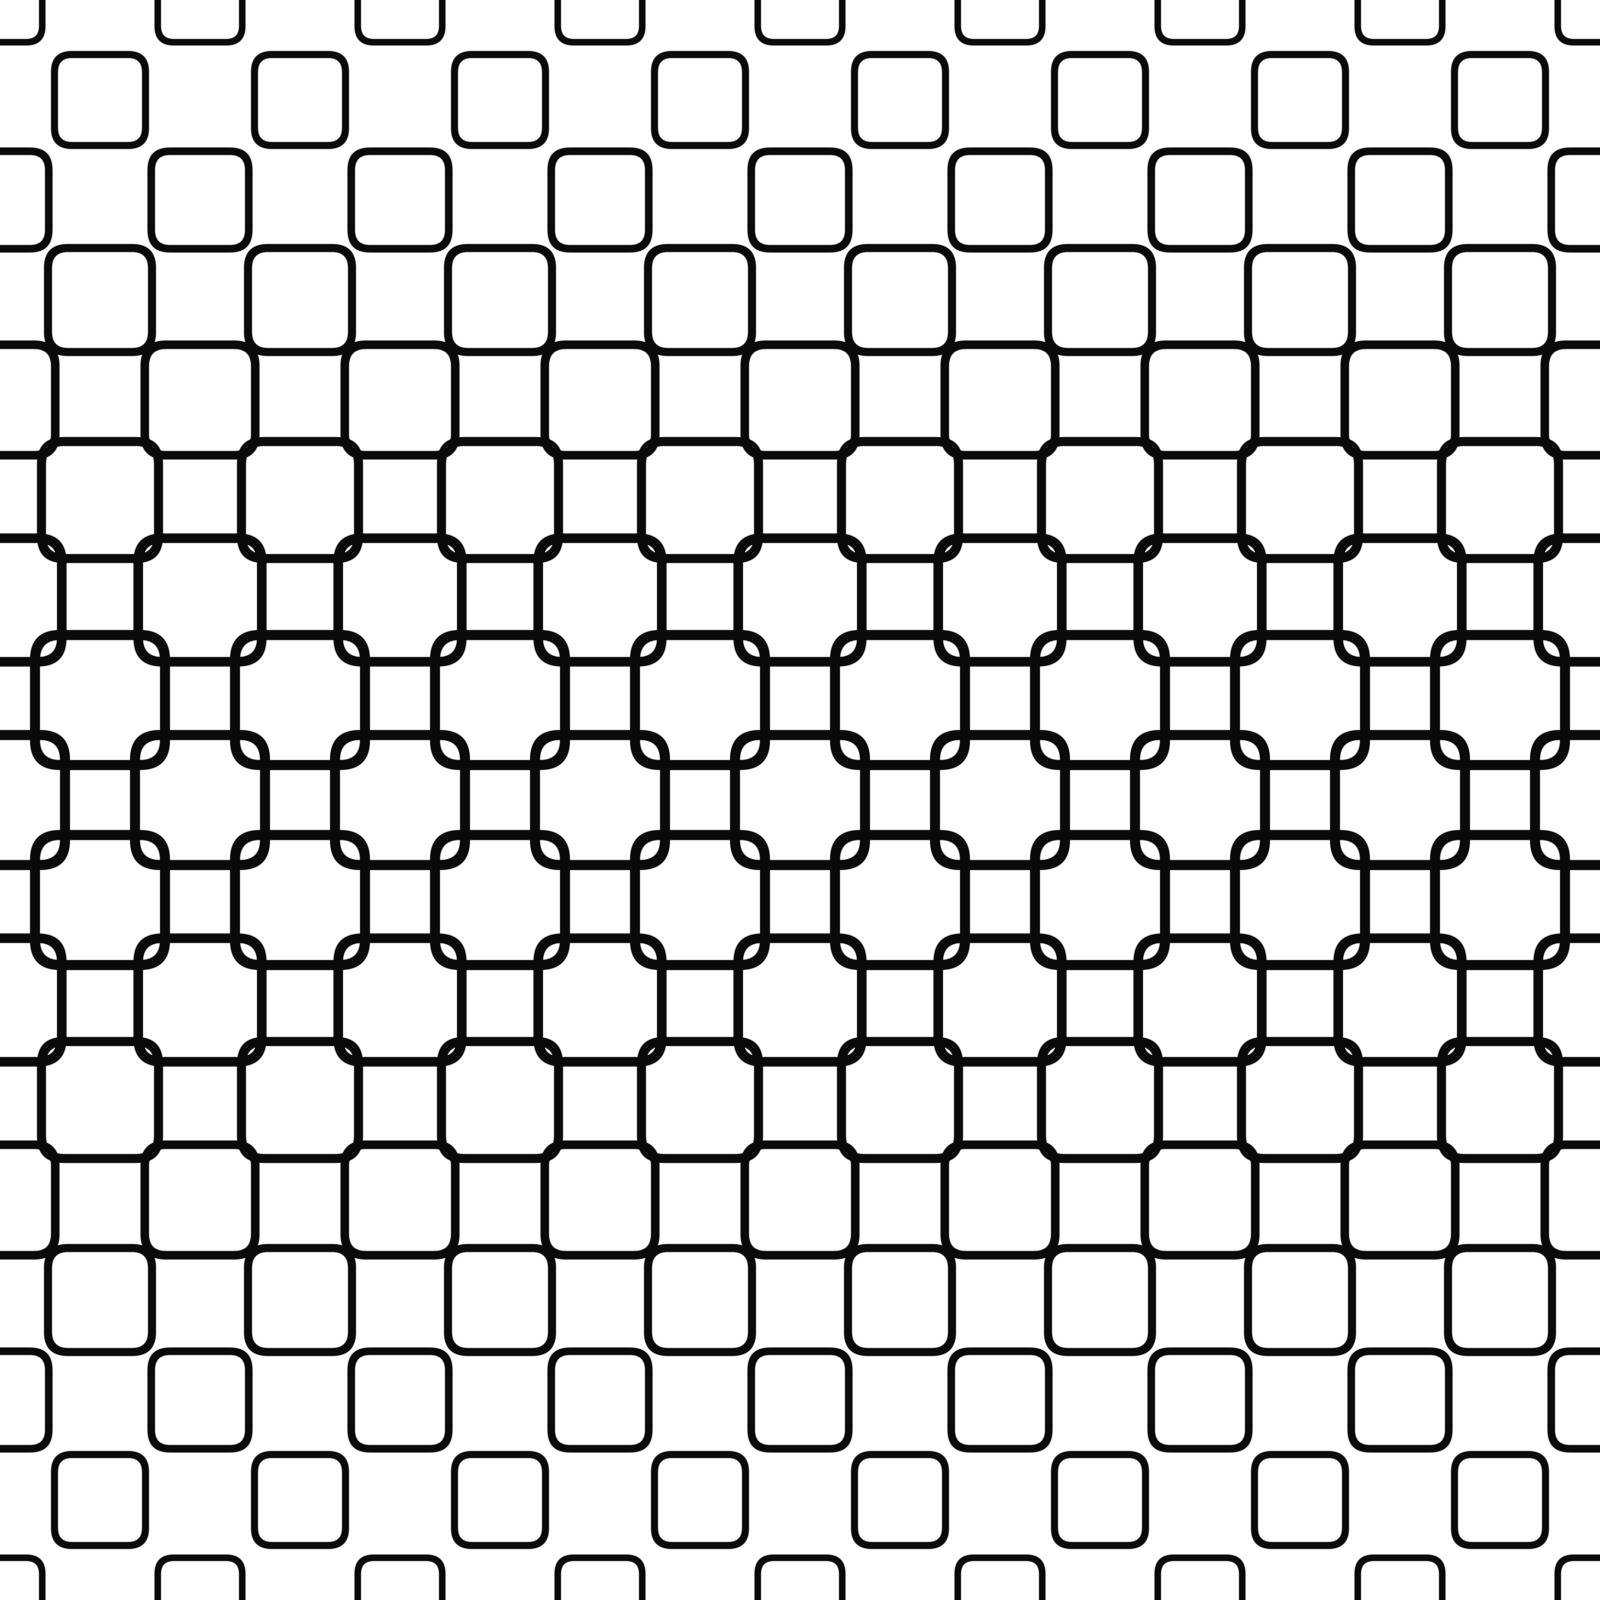 Repeating horizontal monochrome rounded square pattern design